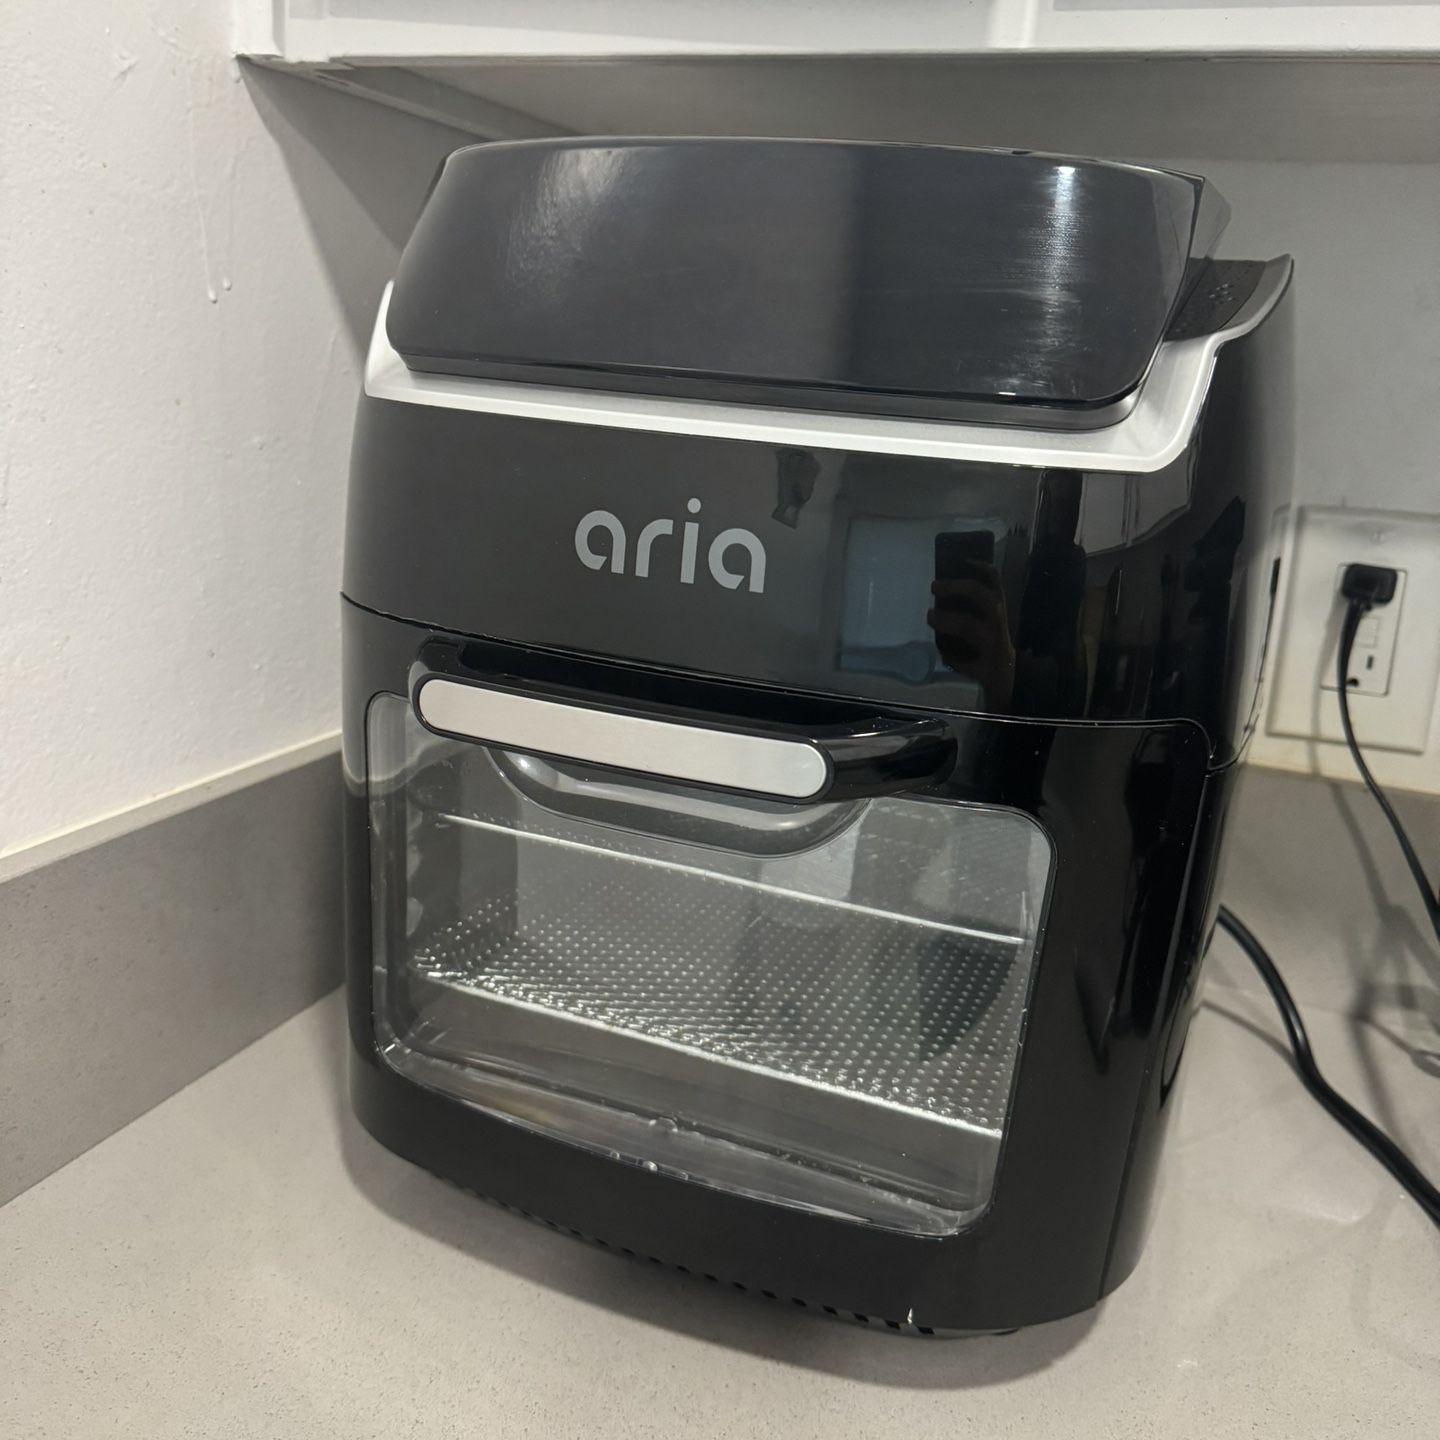 ARIA 10 Qt. Stainless steel air fryer in black with original box